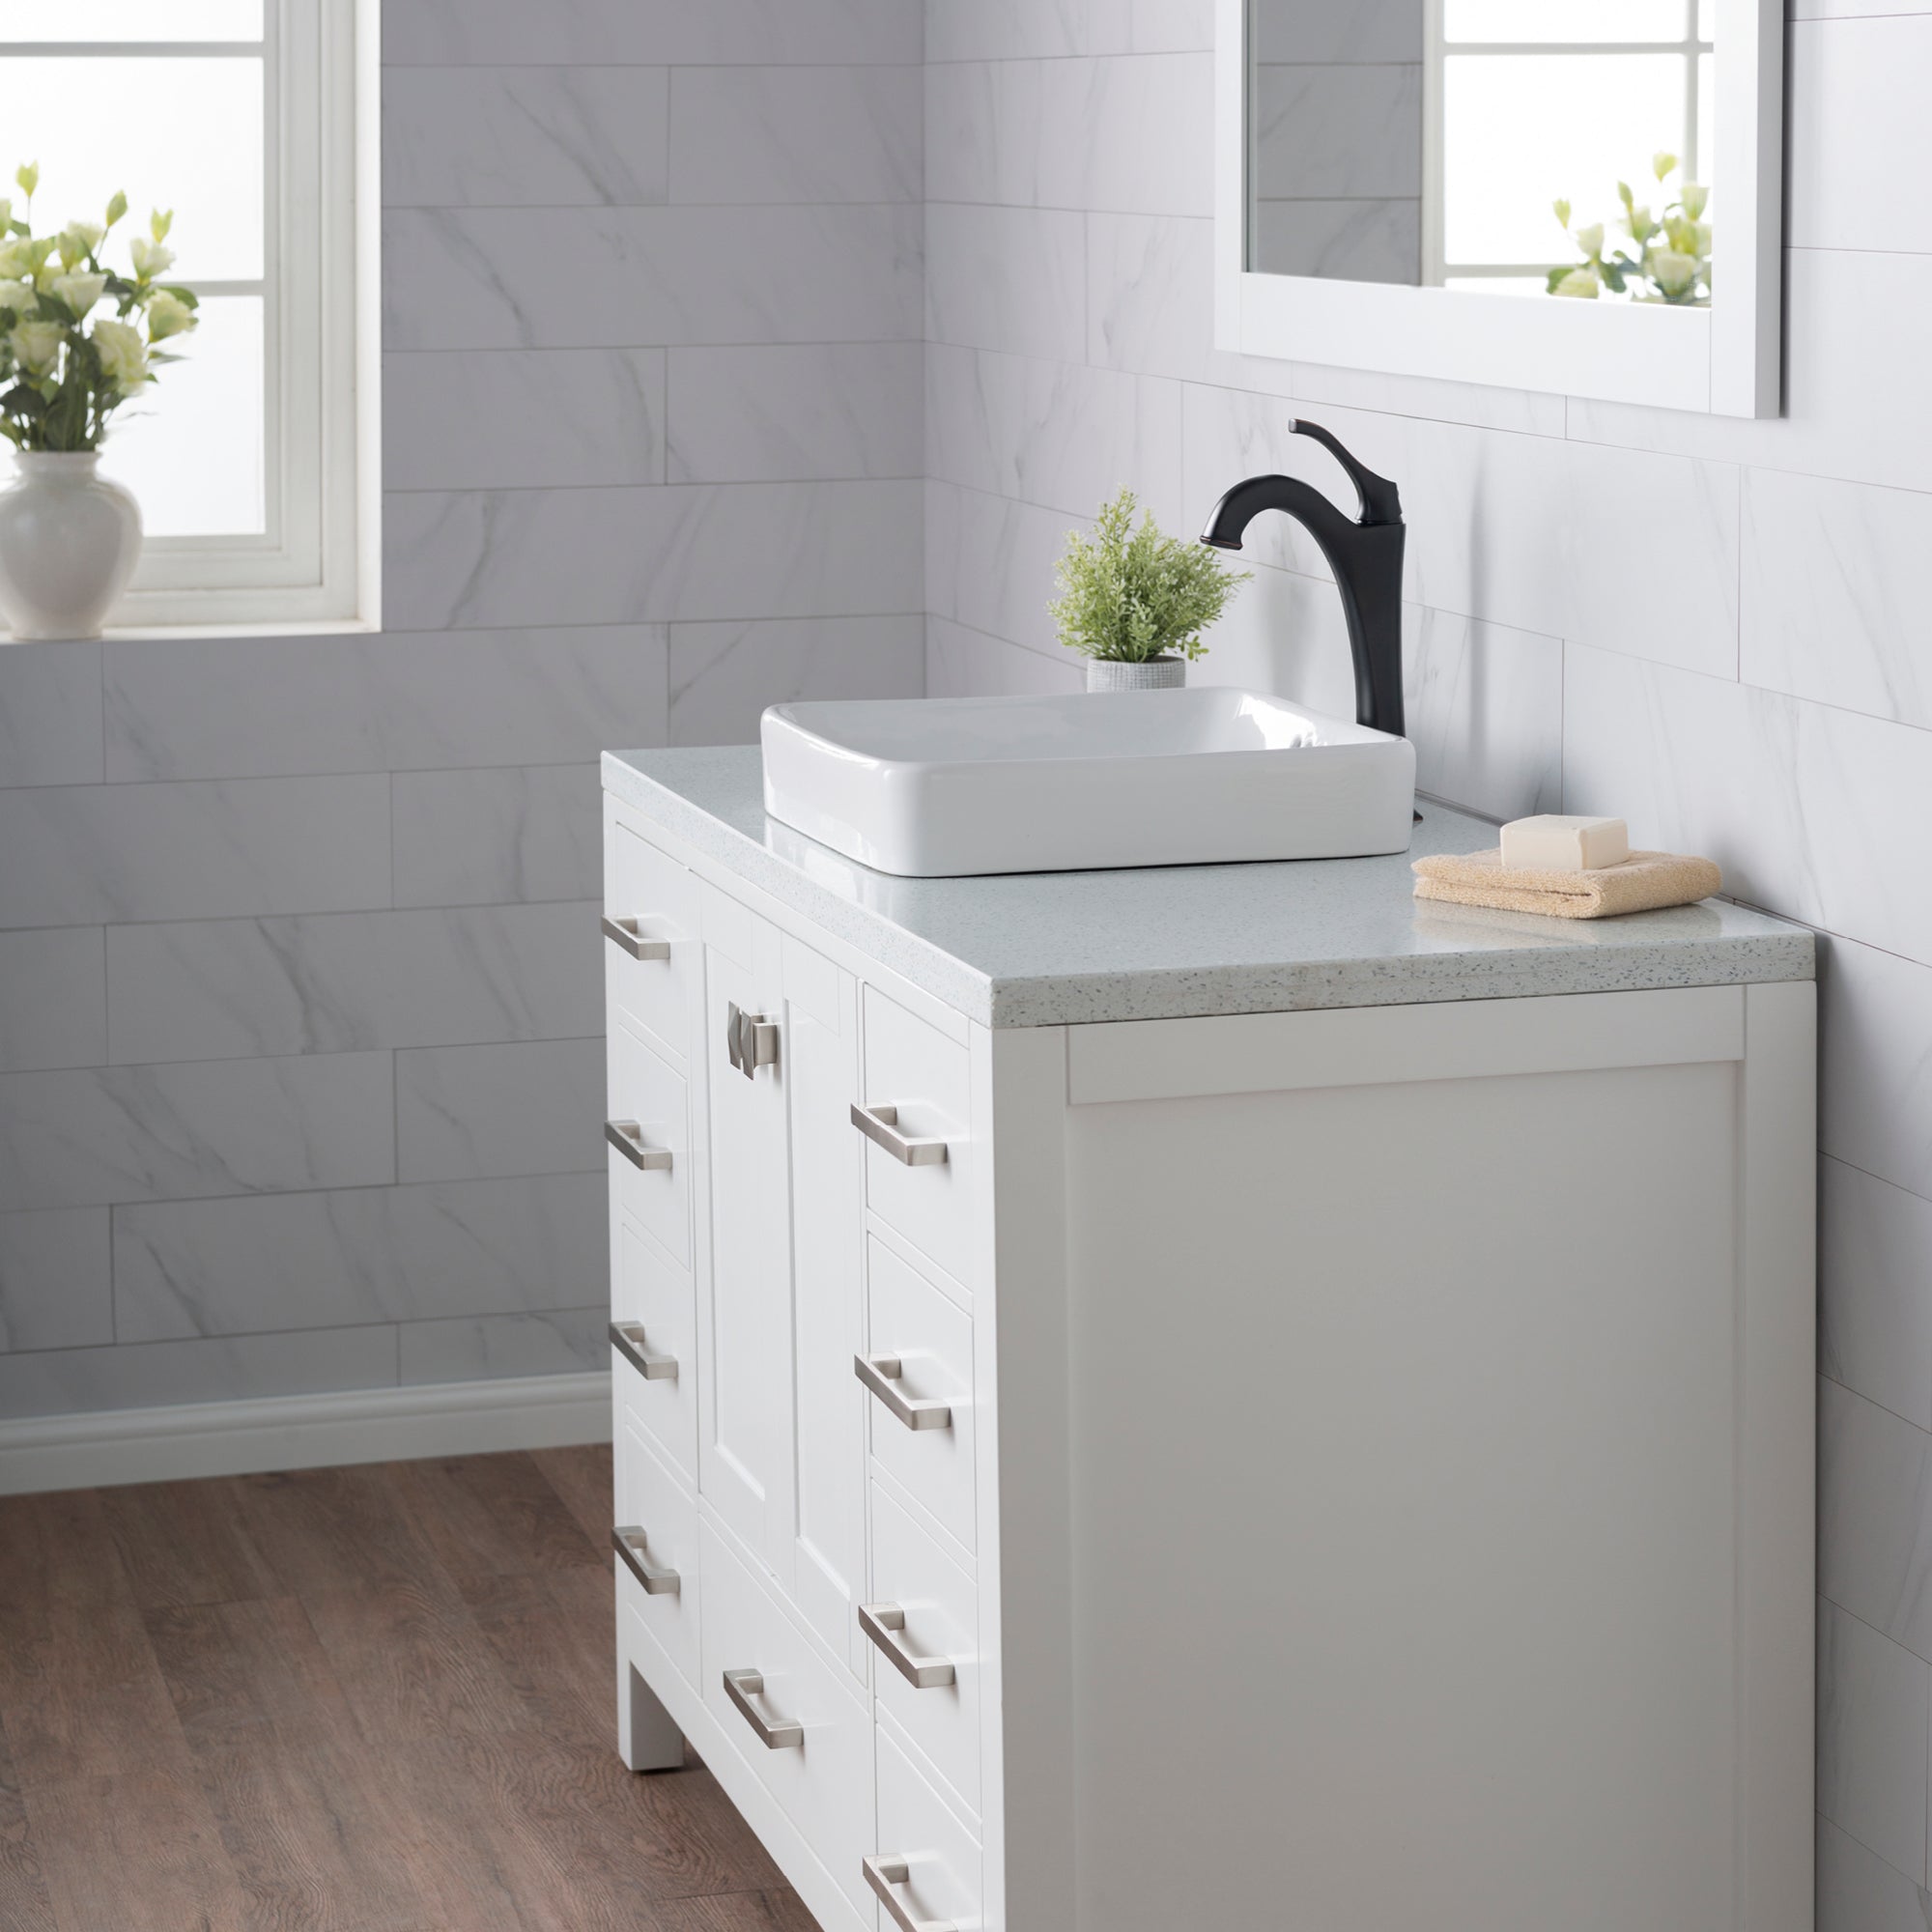 Plaza Basin And Under Sink Cabinet Set, Ceramic, High Gloss, White